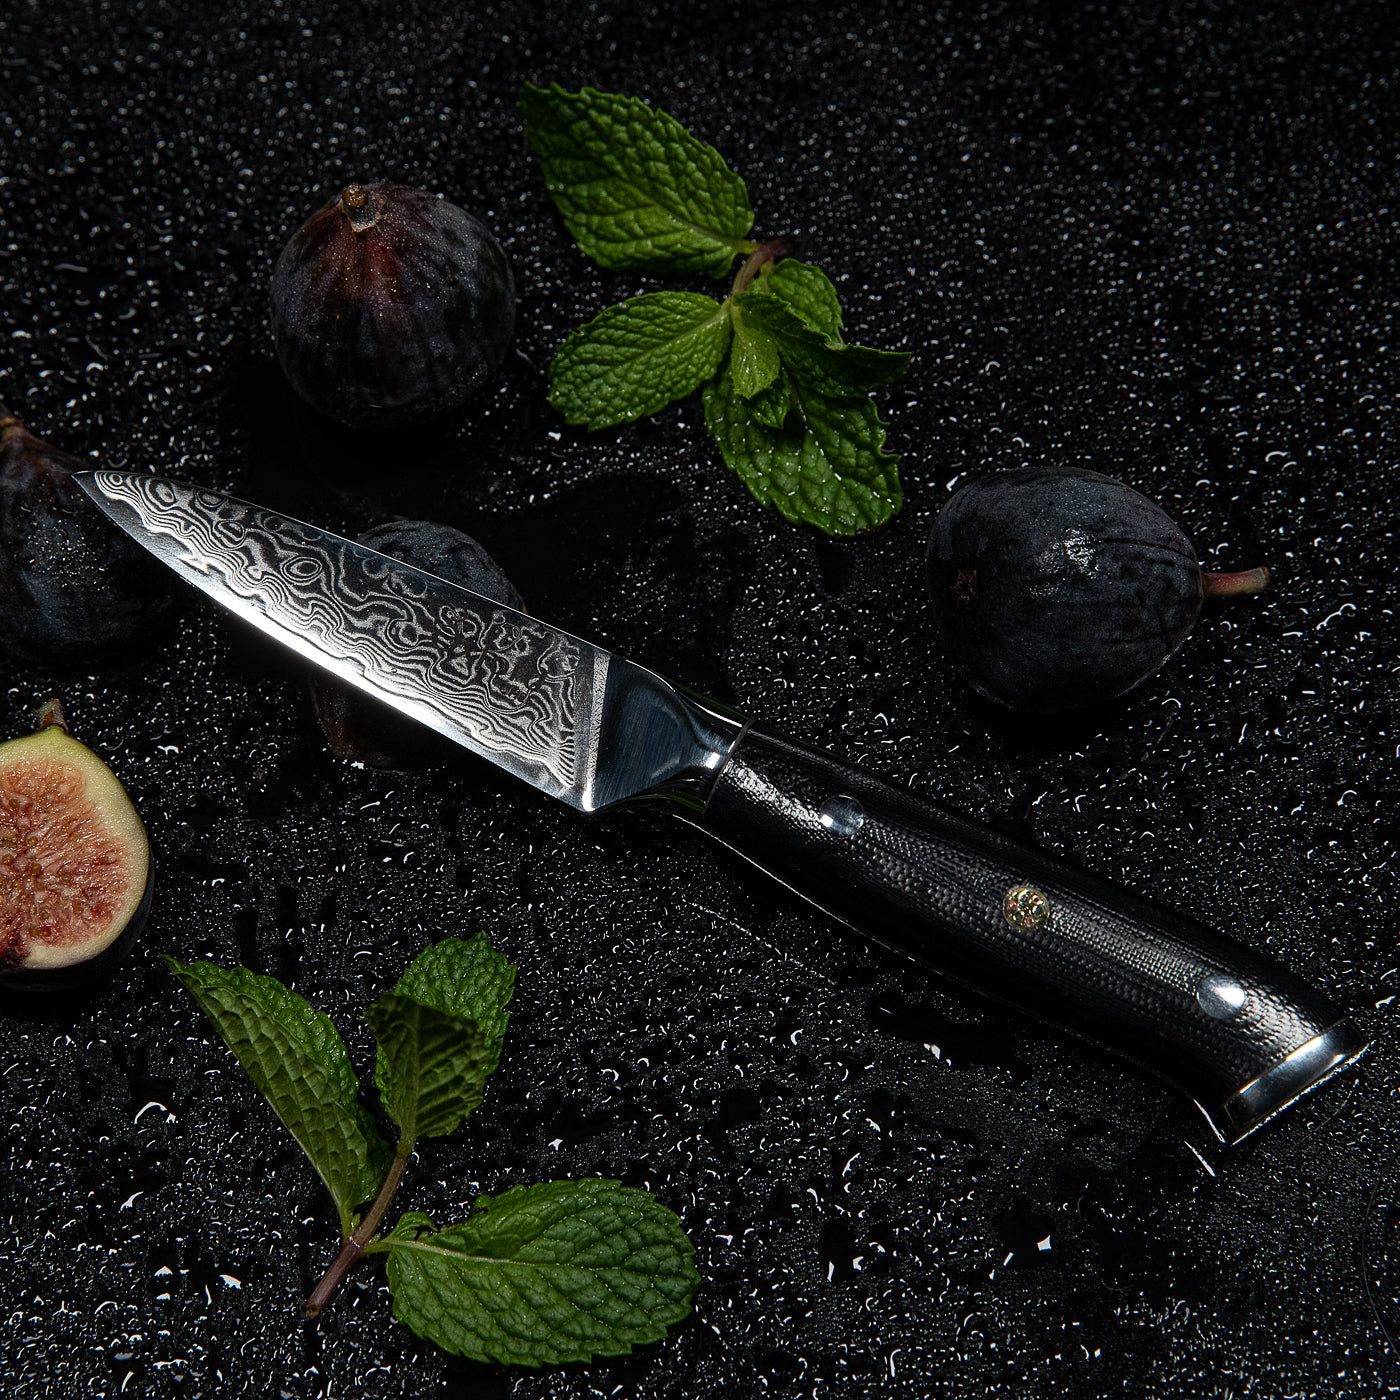 Paring Knife- 3.5 Inch - Damascus- Japanese- VG10 Super Steel 67 Layer High Carbon Stainless Steel- Razor Sharp, Stain & Corrosion Resistant